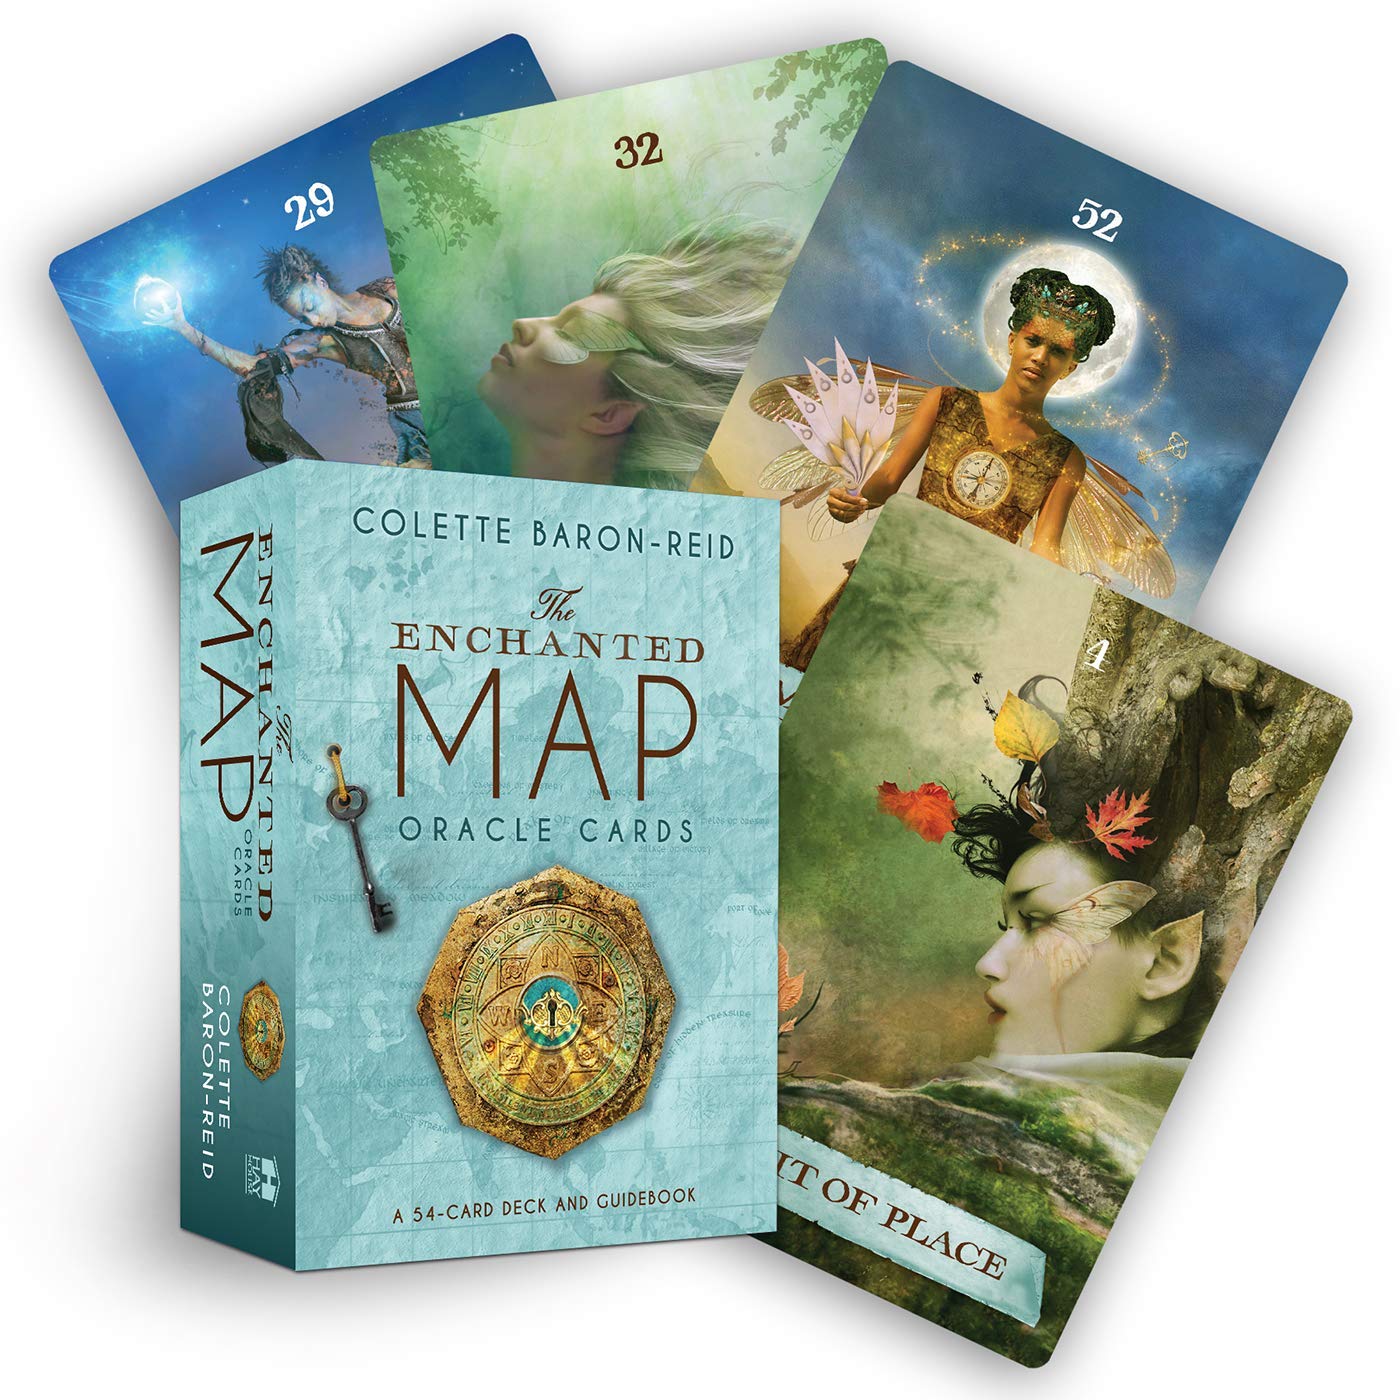 The Enchanted Map Oracle Cards: A 54-Card Deck and Guidebook || Colette Baron-Reid